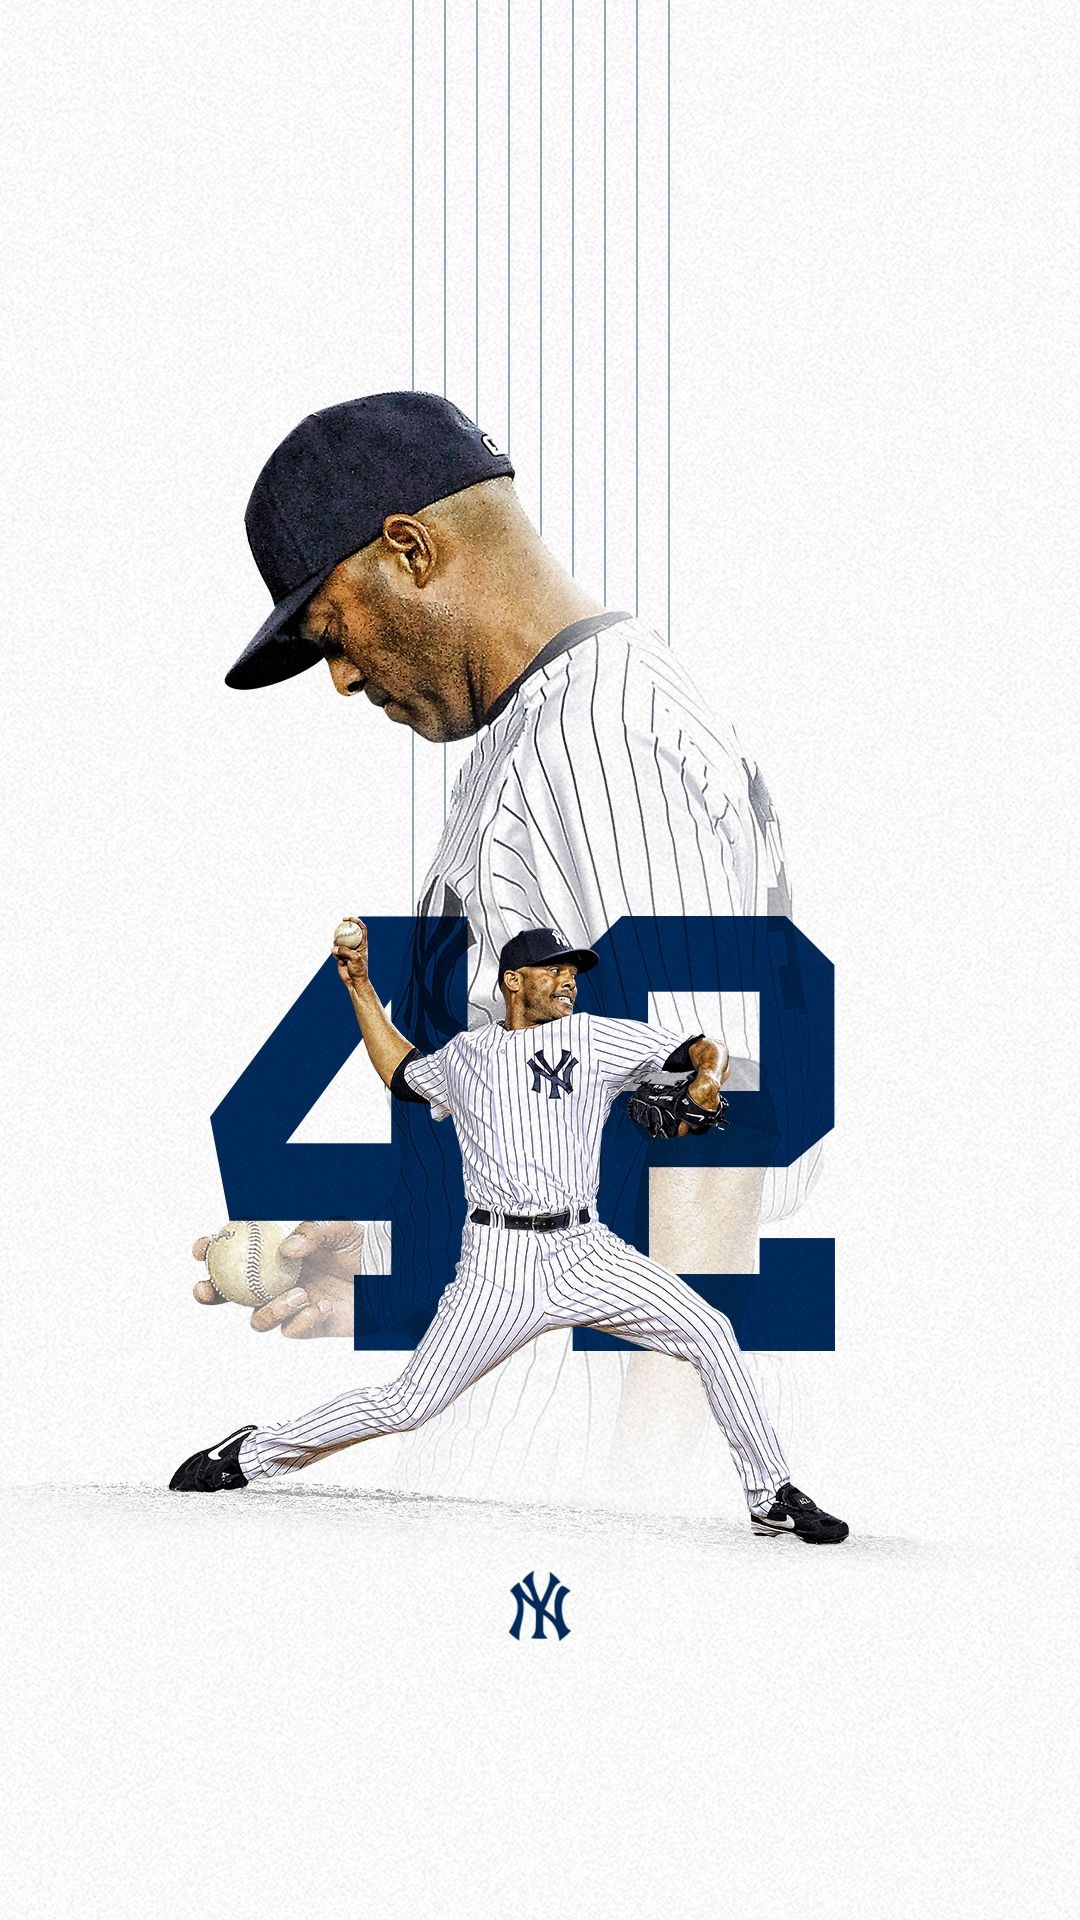 HD wallpaper, Baseball Heroes, Mariano Rivera, 1080X1920 Full Hd Phone, Mobile Full Hd Mariano Rivera Wallpaper Photo, Legends Of The Game, Yankees Players